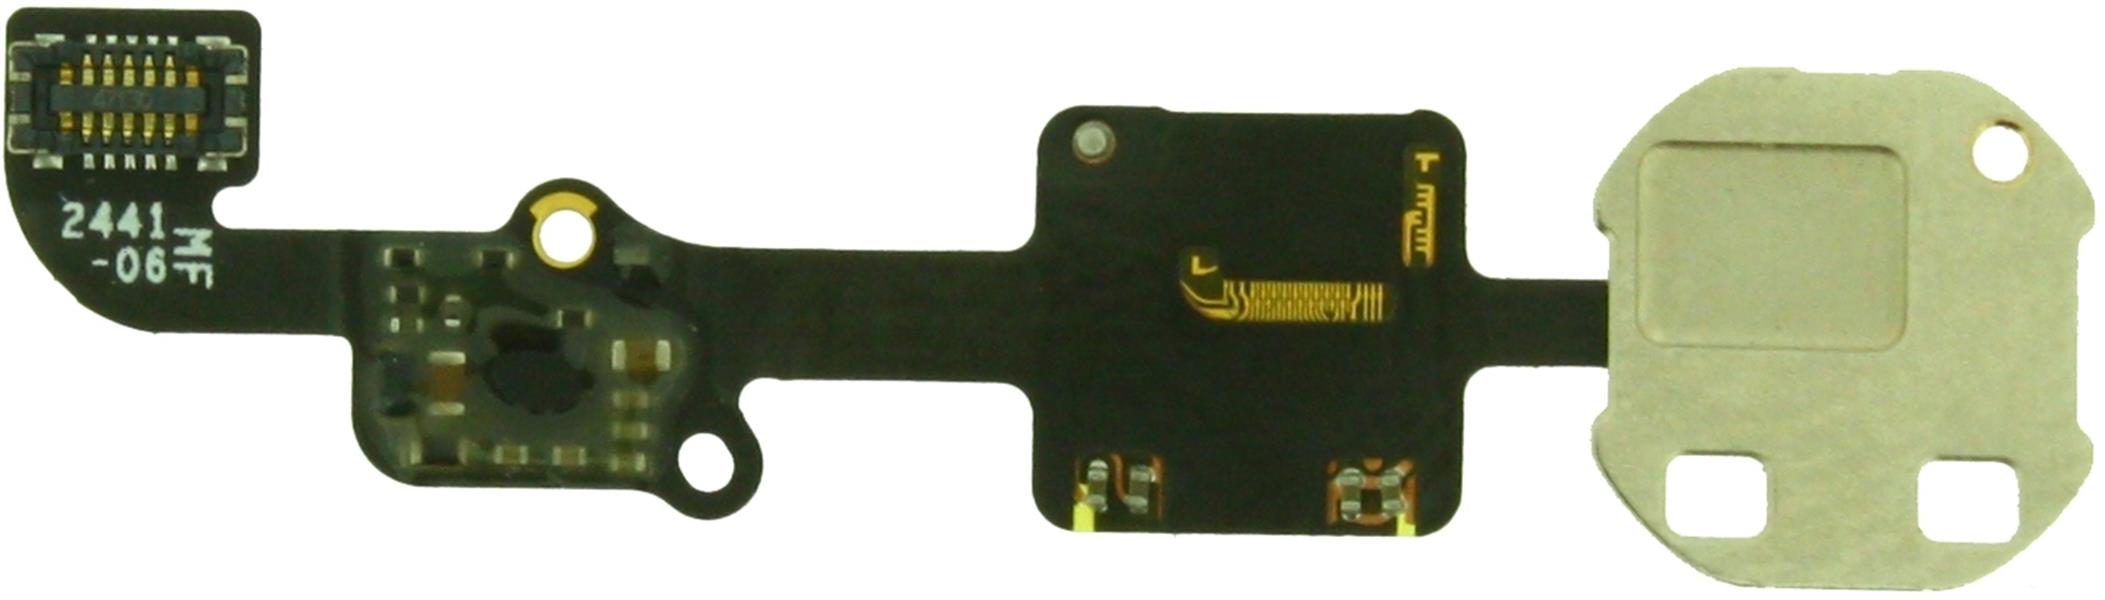 Replacement Home Button Flex Cable for Apple iPhone 6 6 Plus OEM